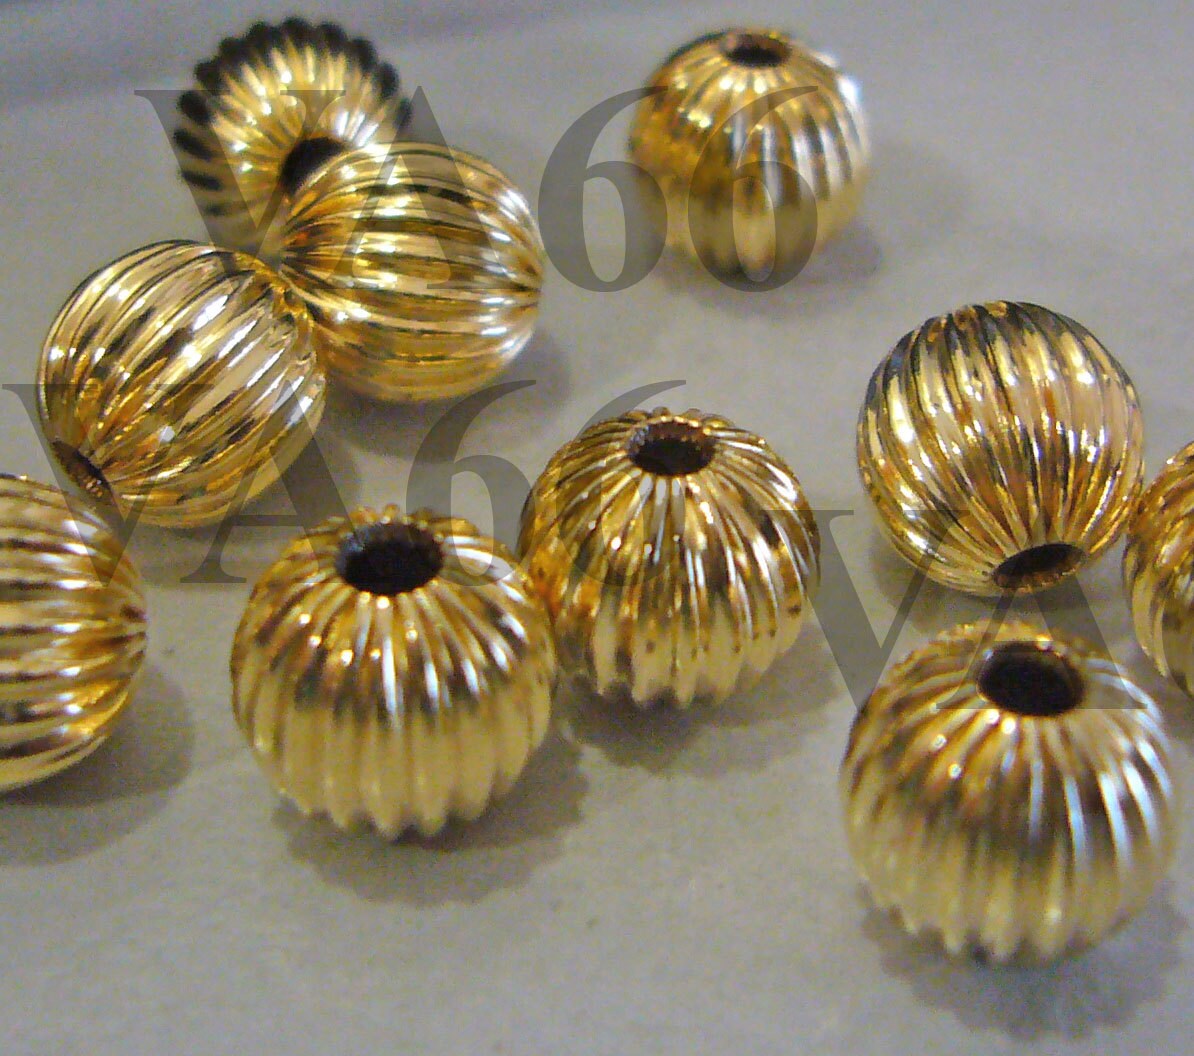 Bali Style Beads Sterling Silver Beads for Jewelry Making 10mm Inspire  Glass Studio 